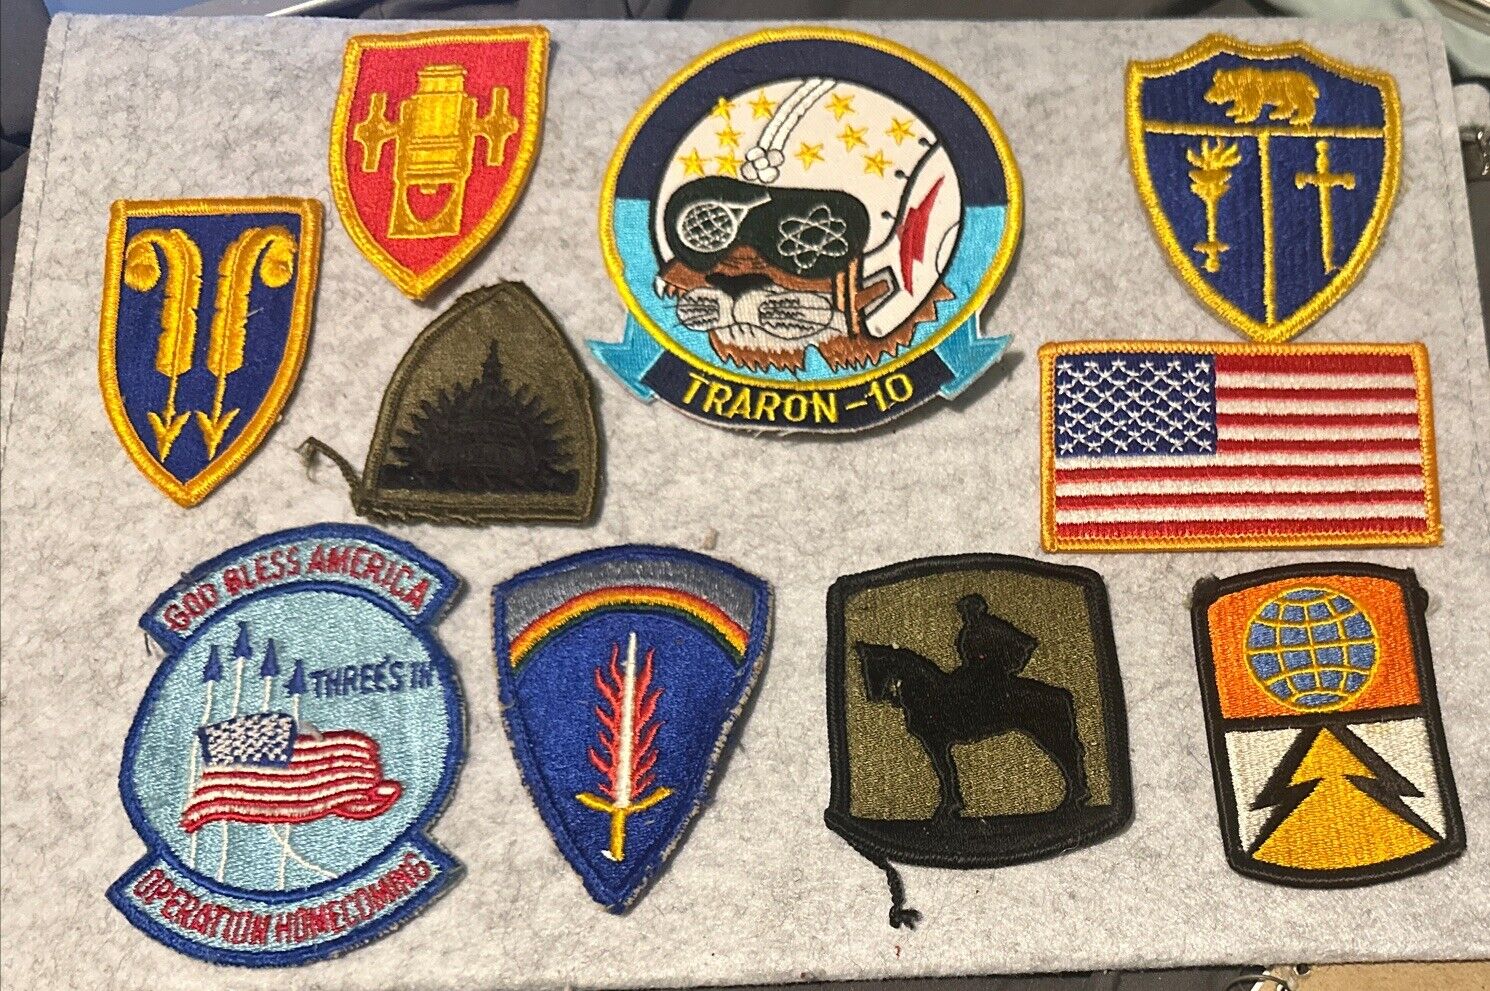 Lot Of (10) Military Patch Navy Traron-10, Army, Operation Homecoming, USA Flag